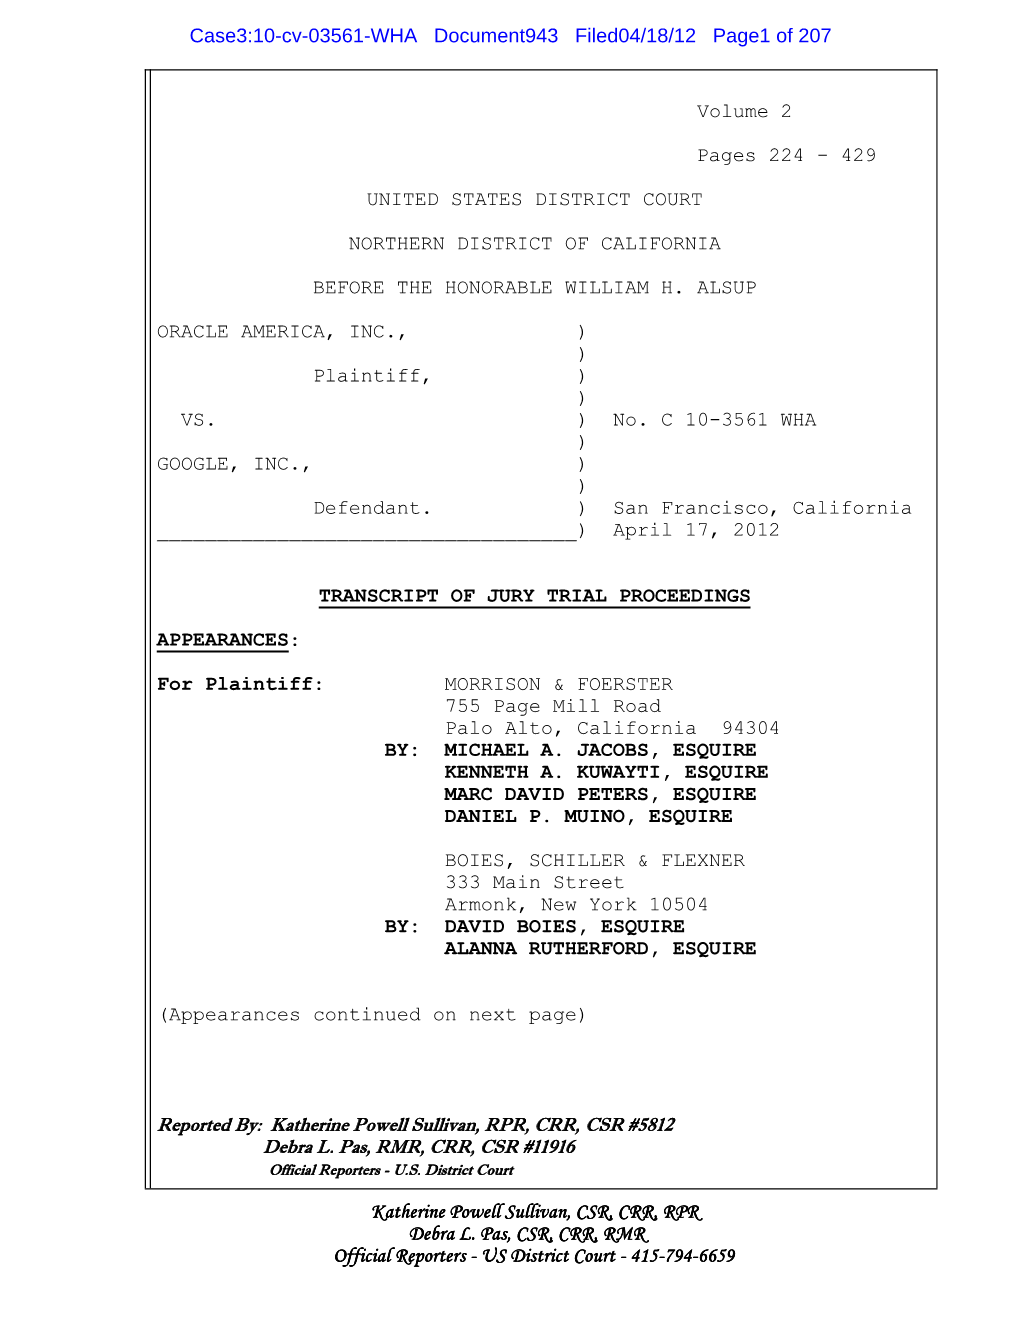 Case3:10-Cv-03561-WHA Document943 Filed04/18/12 Page1 of 207